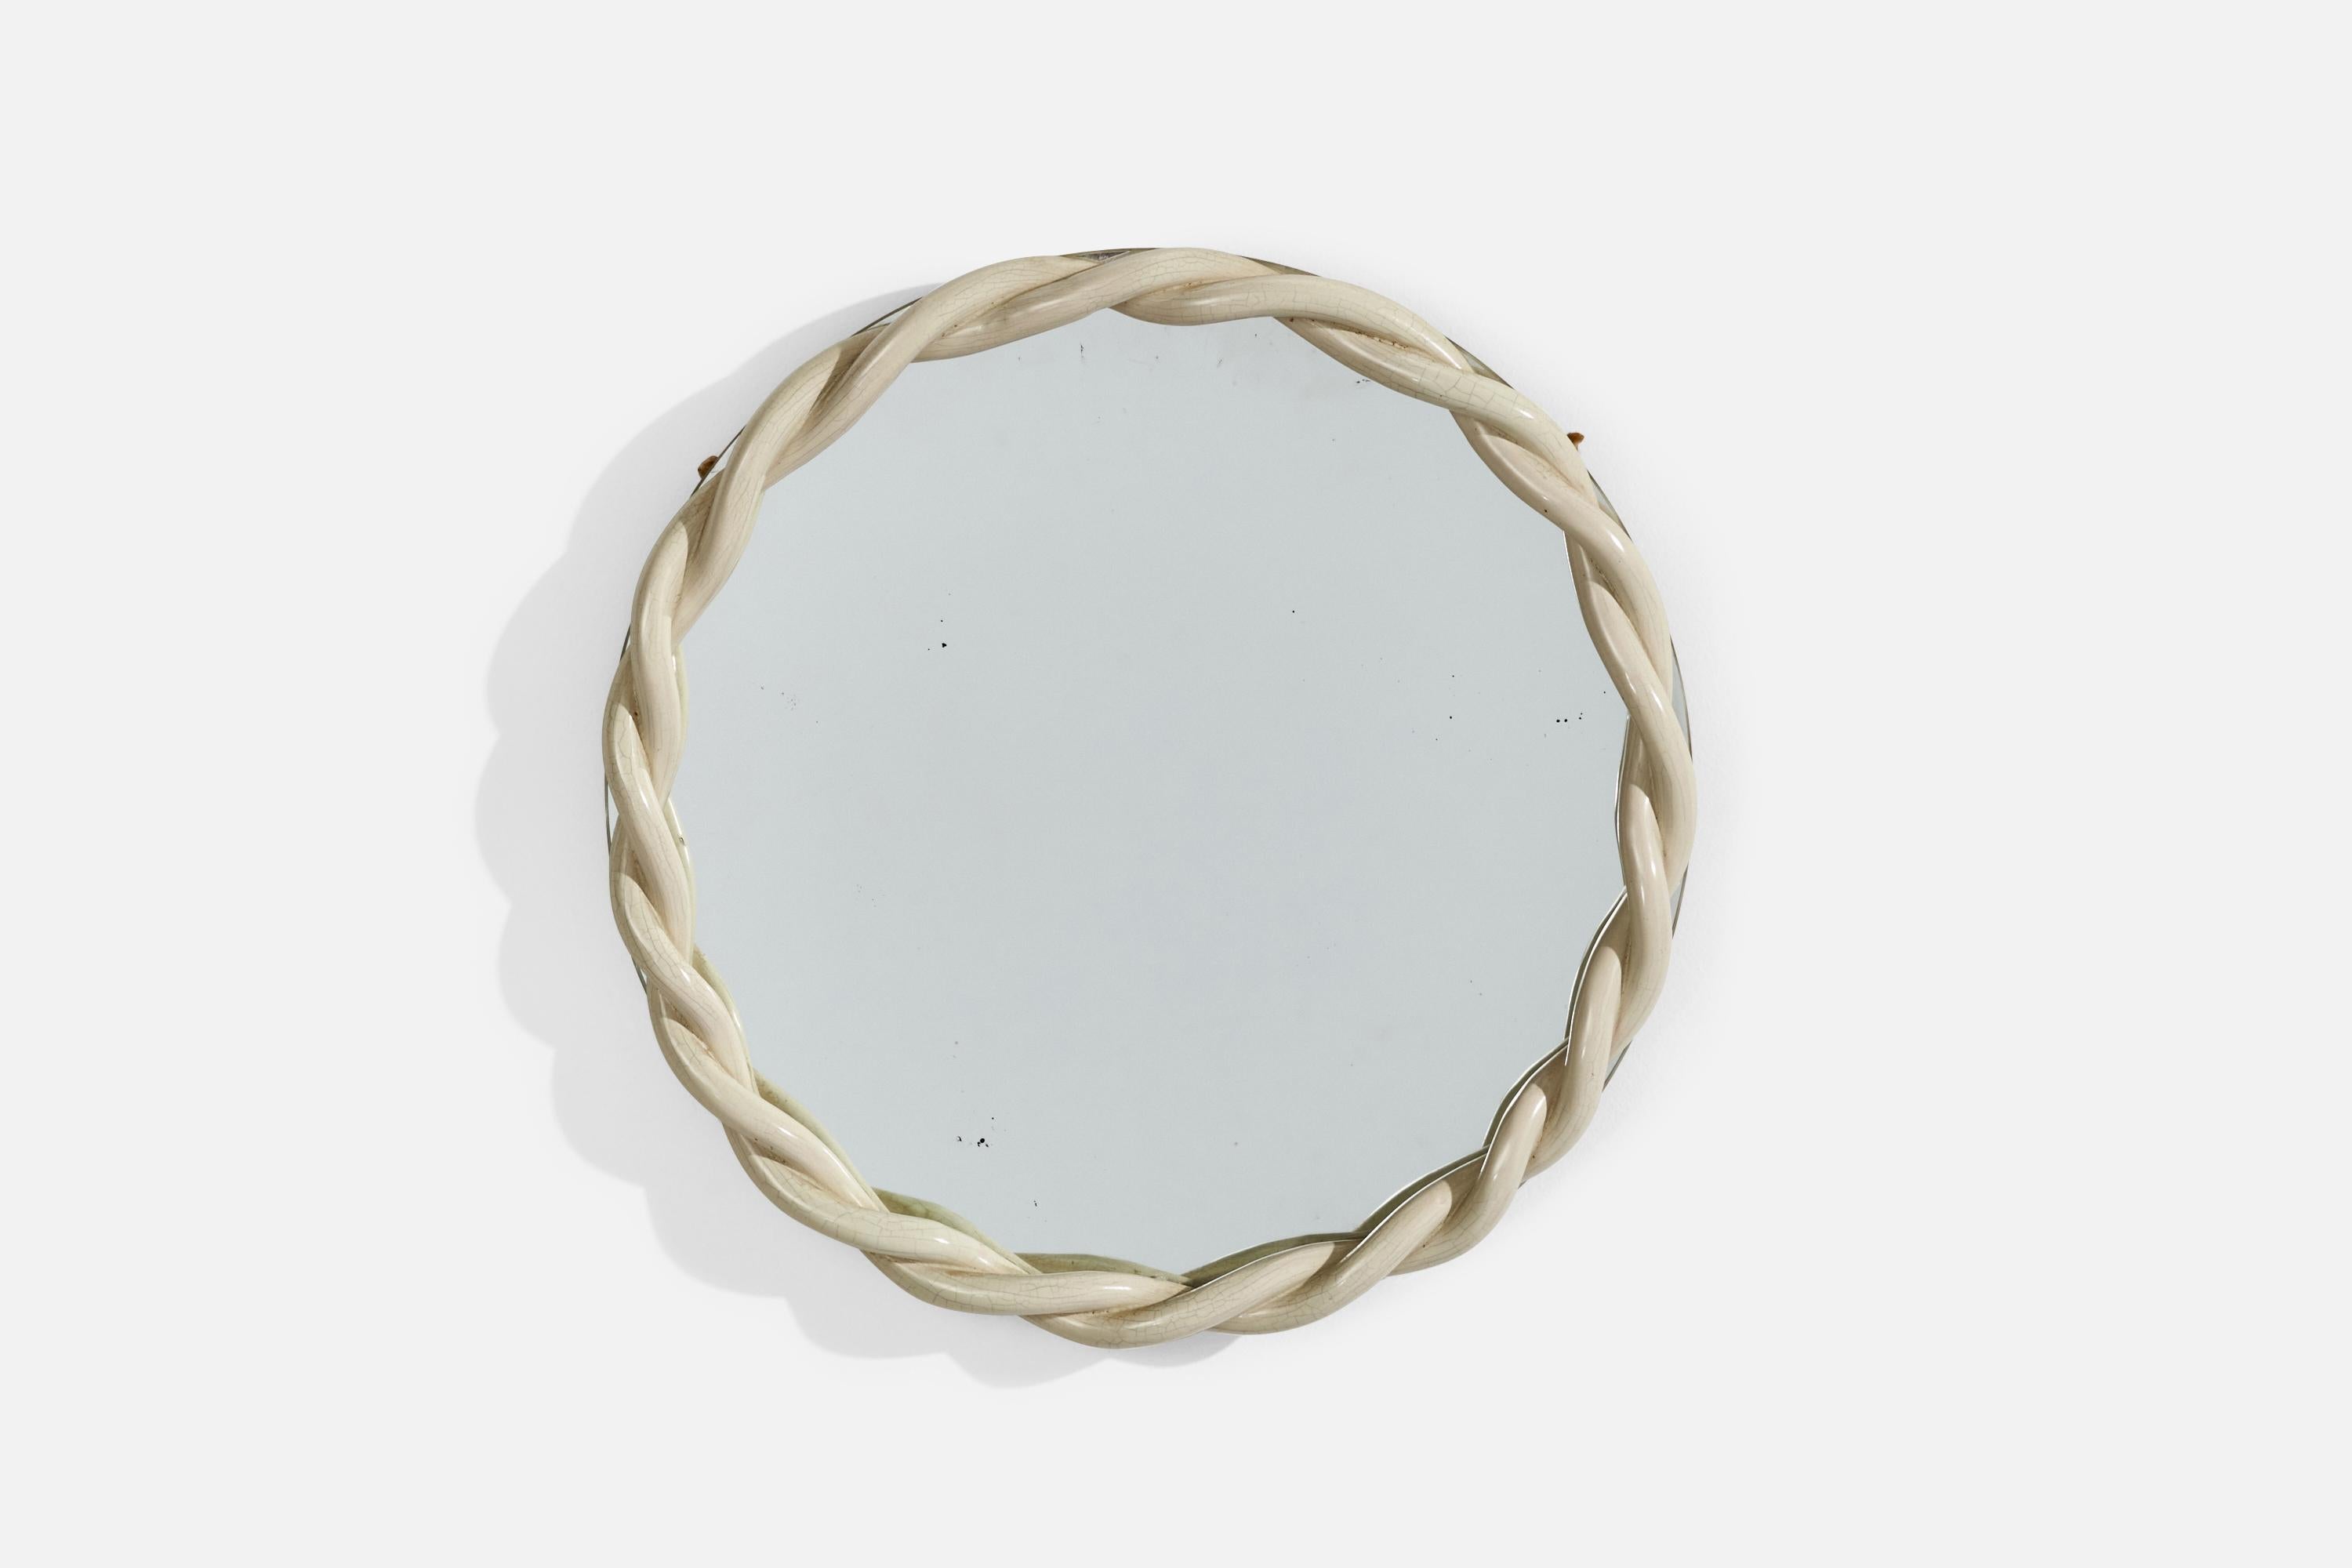 A round off-white-glazed ceramic wall mirror designed and produced by Bo Fajans, Sweden, c. 1940s.